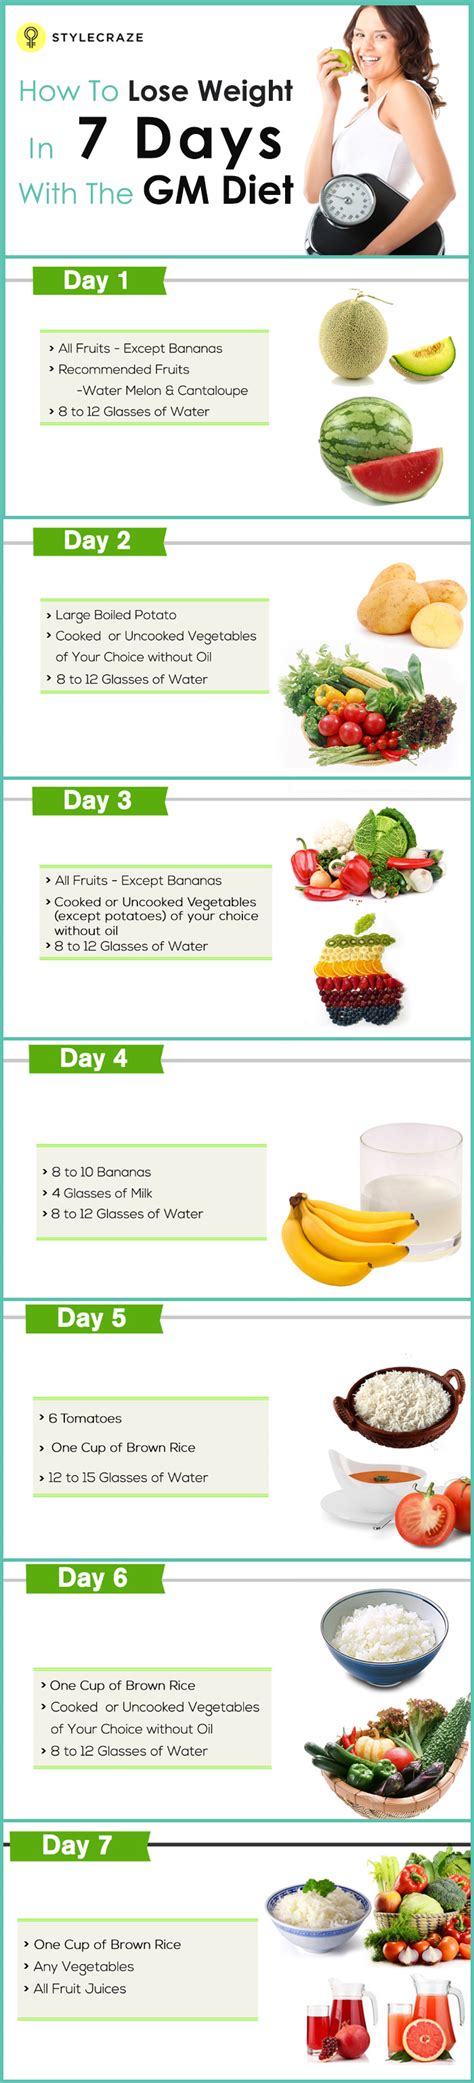 Lose 10 Pounds In A Week Seven Day Diet Plan Caloriebee 7 Day Eating Plan To Lose Weight